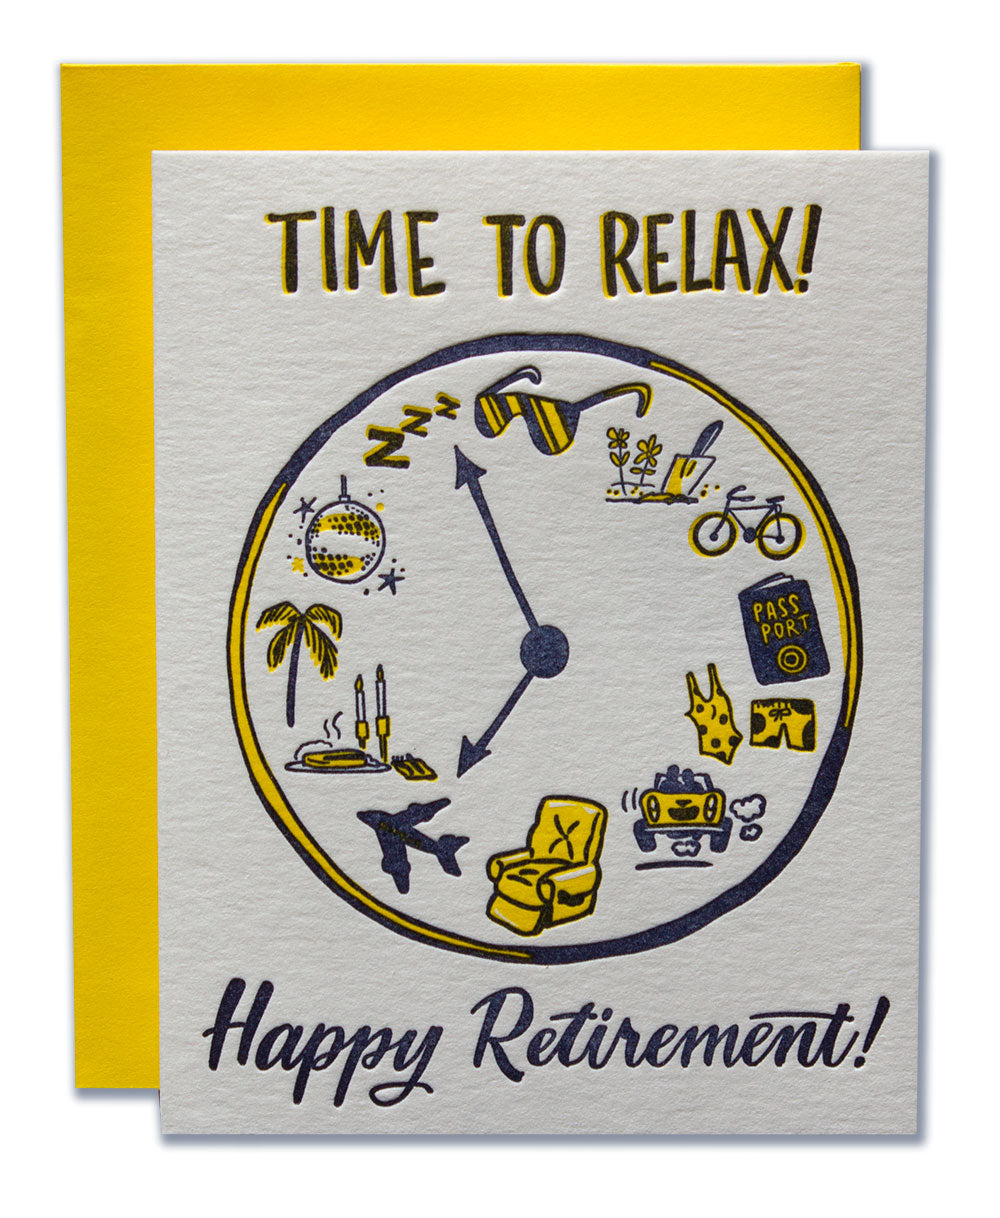 Time To Relax! Happy Retirement! - Ladyfingers Letterpress